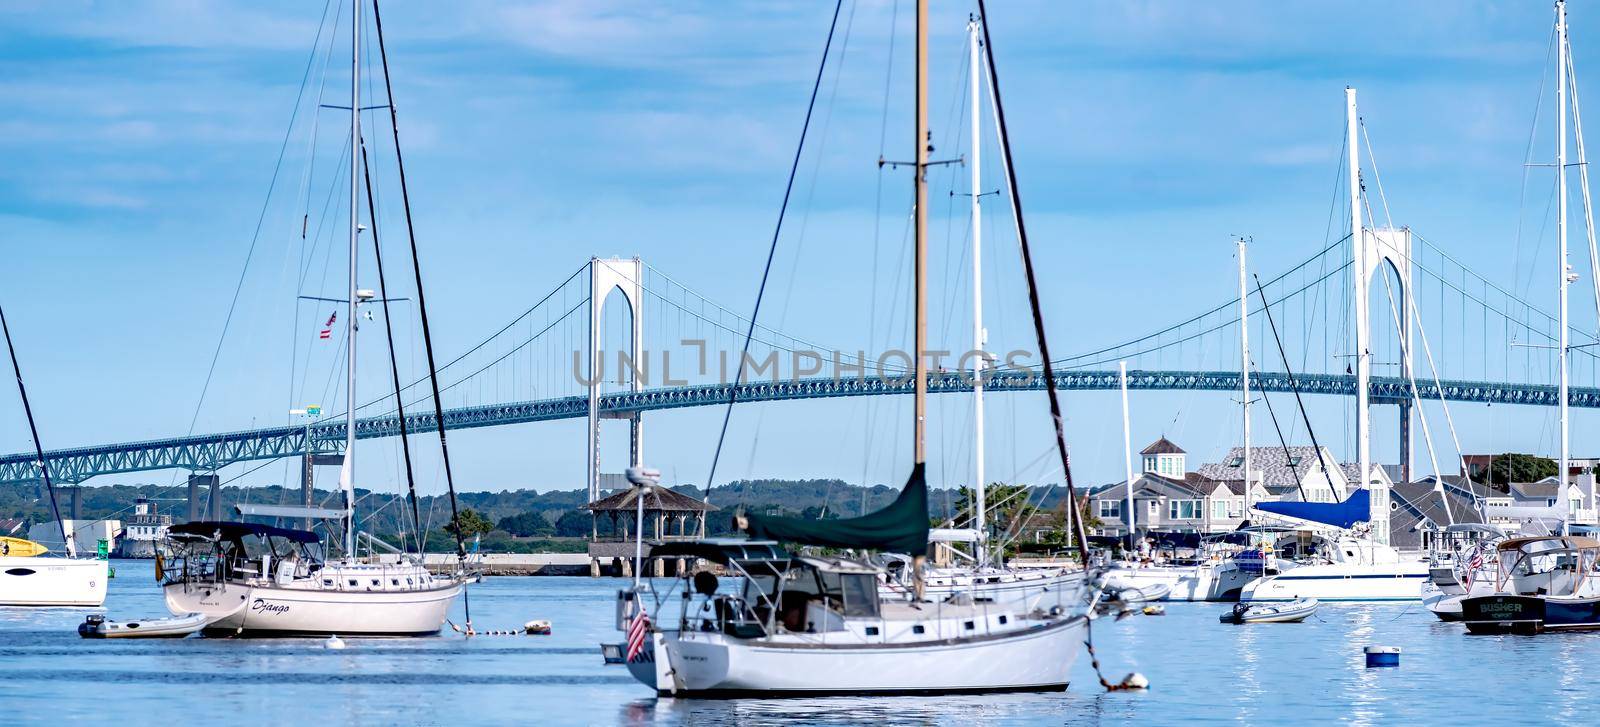 newport rhode island scenic views at harbour by digidreamgrafix